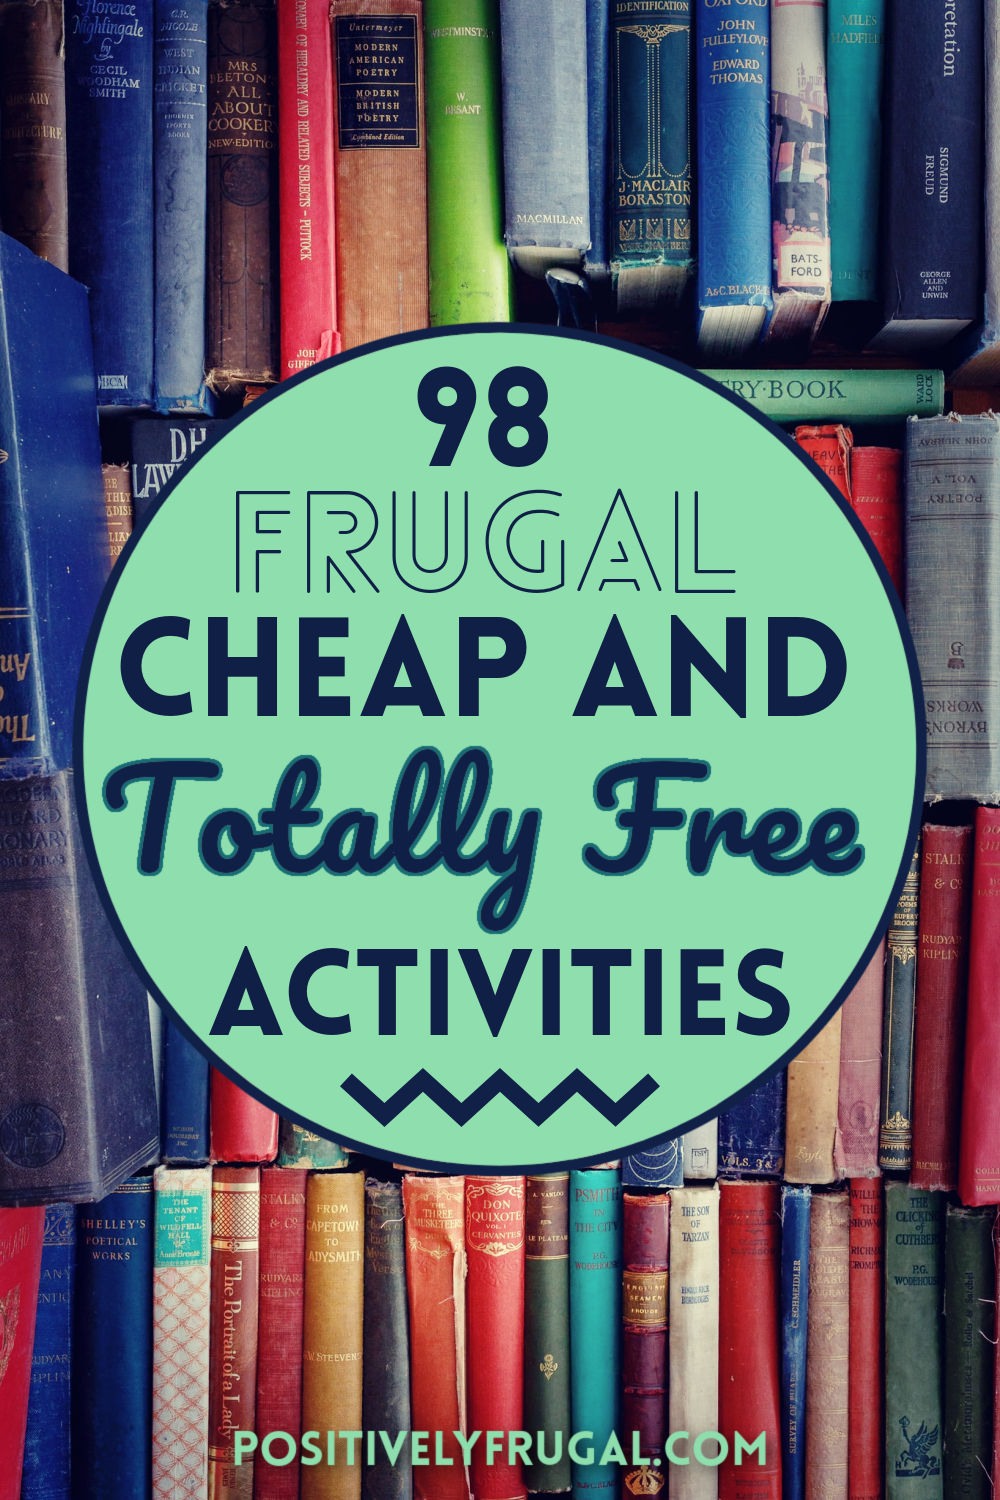 98 Frugal Cheap and Totally Free Activities by PositivelyFrugal.com